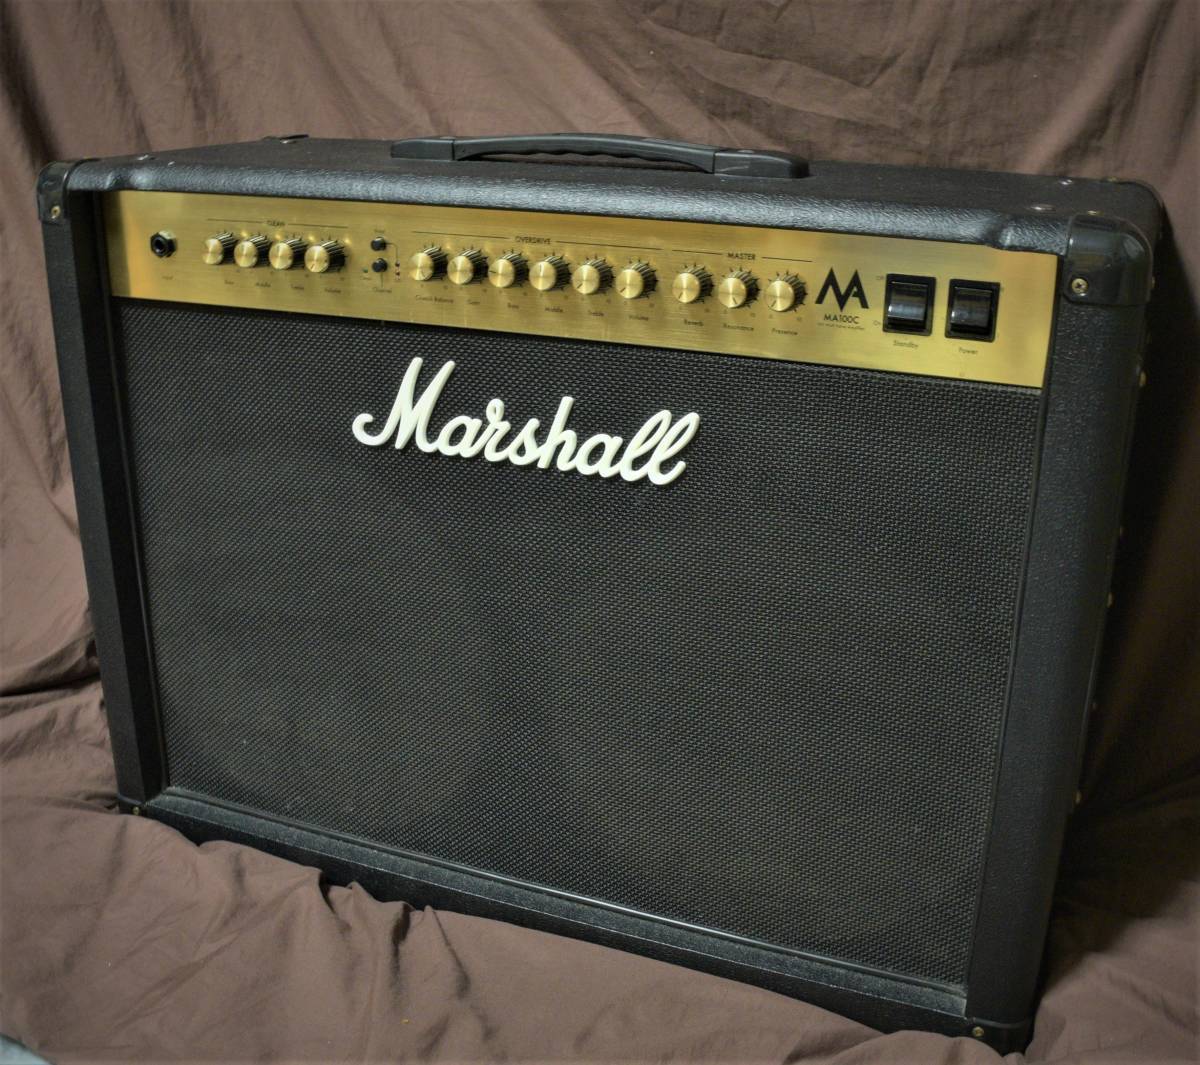 year end stock disposal price ]Marshall ma100c used good goods Marshall  guitar amplifier : Real Yahoo auction salling